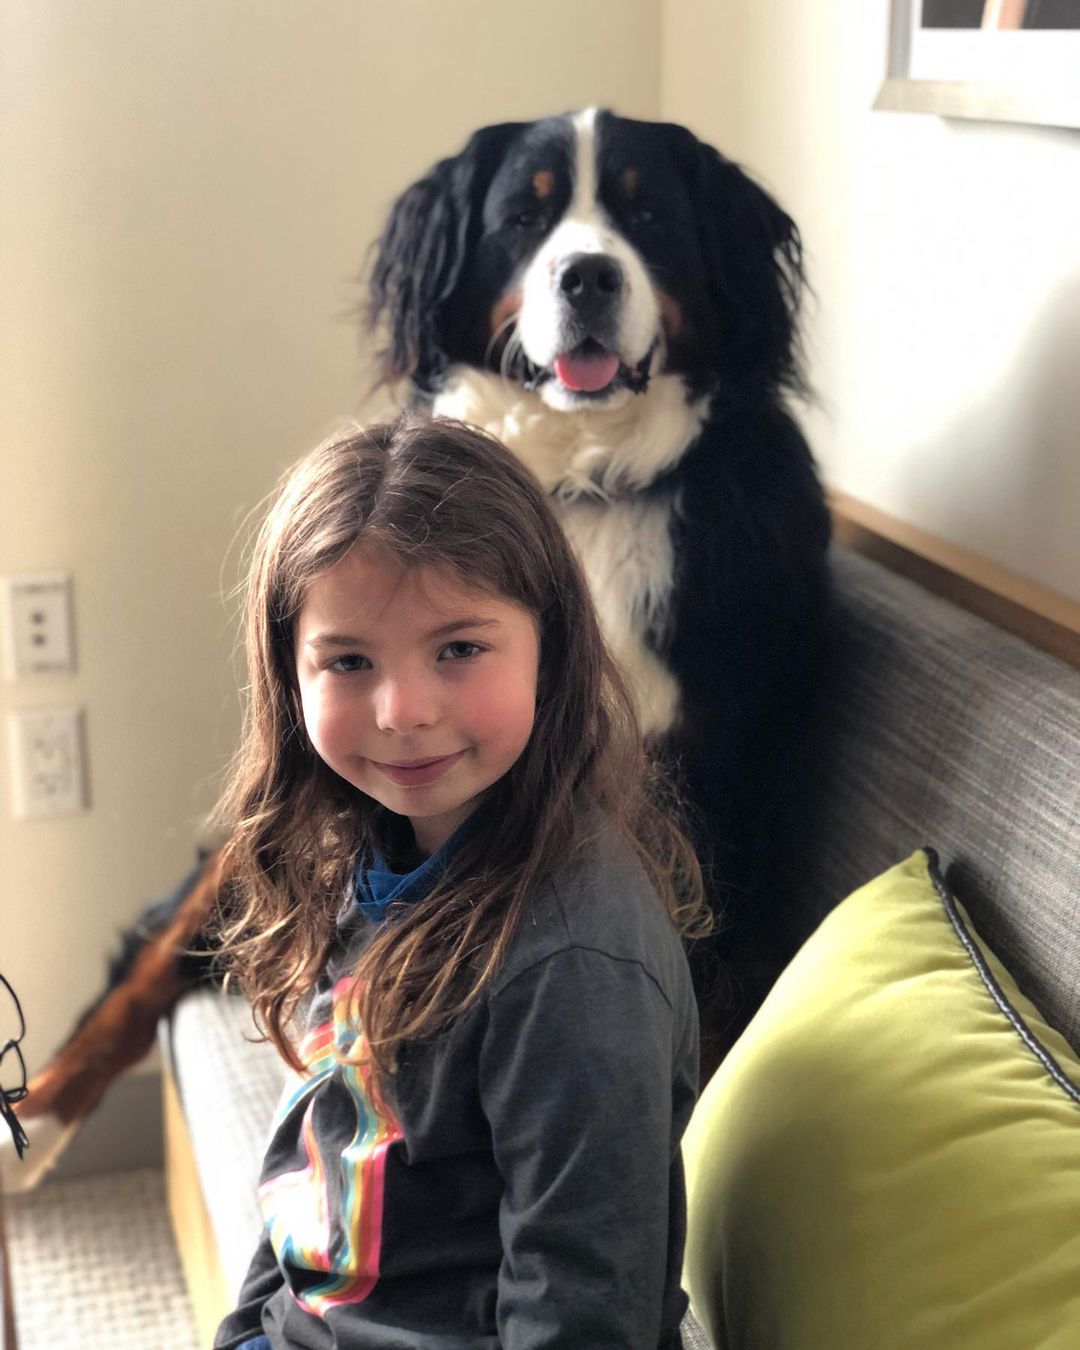 photo of a little girl and a giant dog